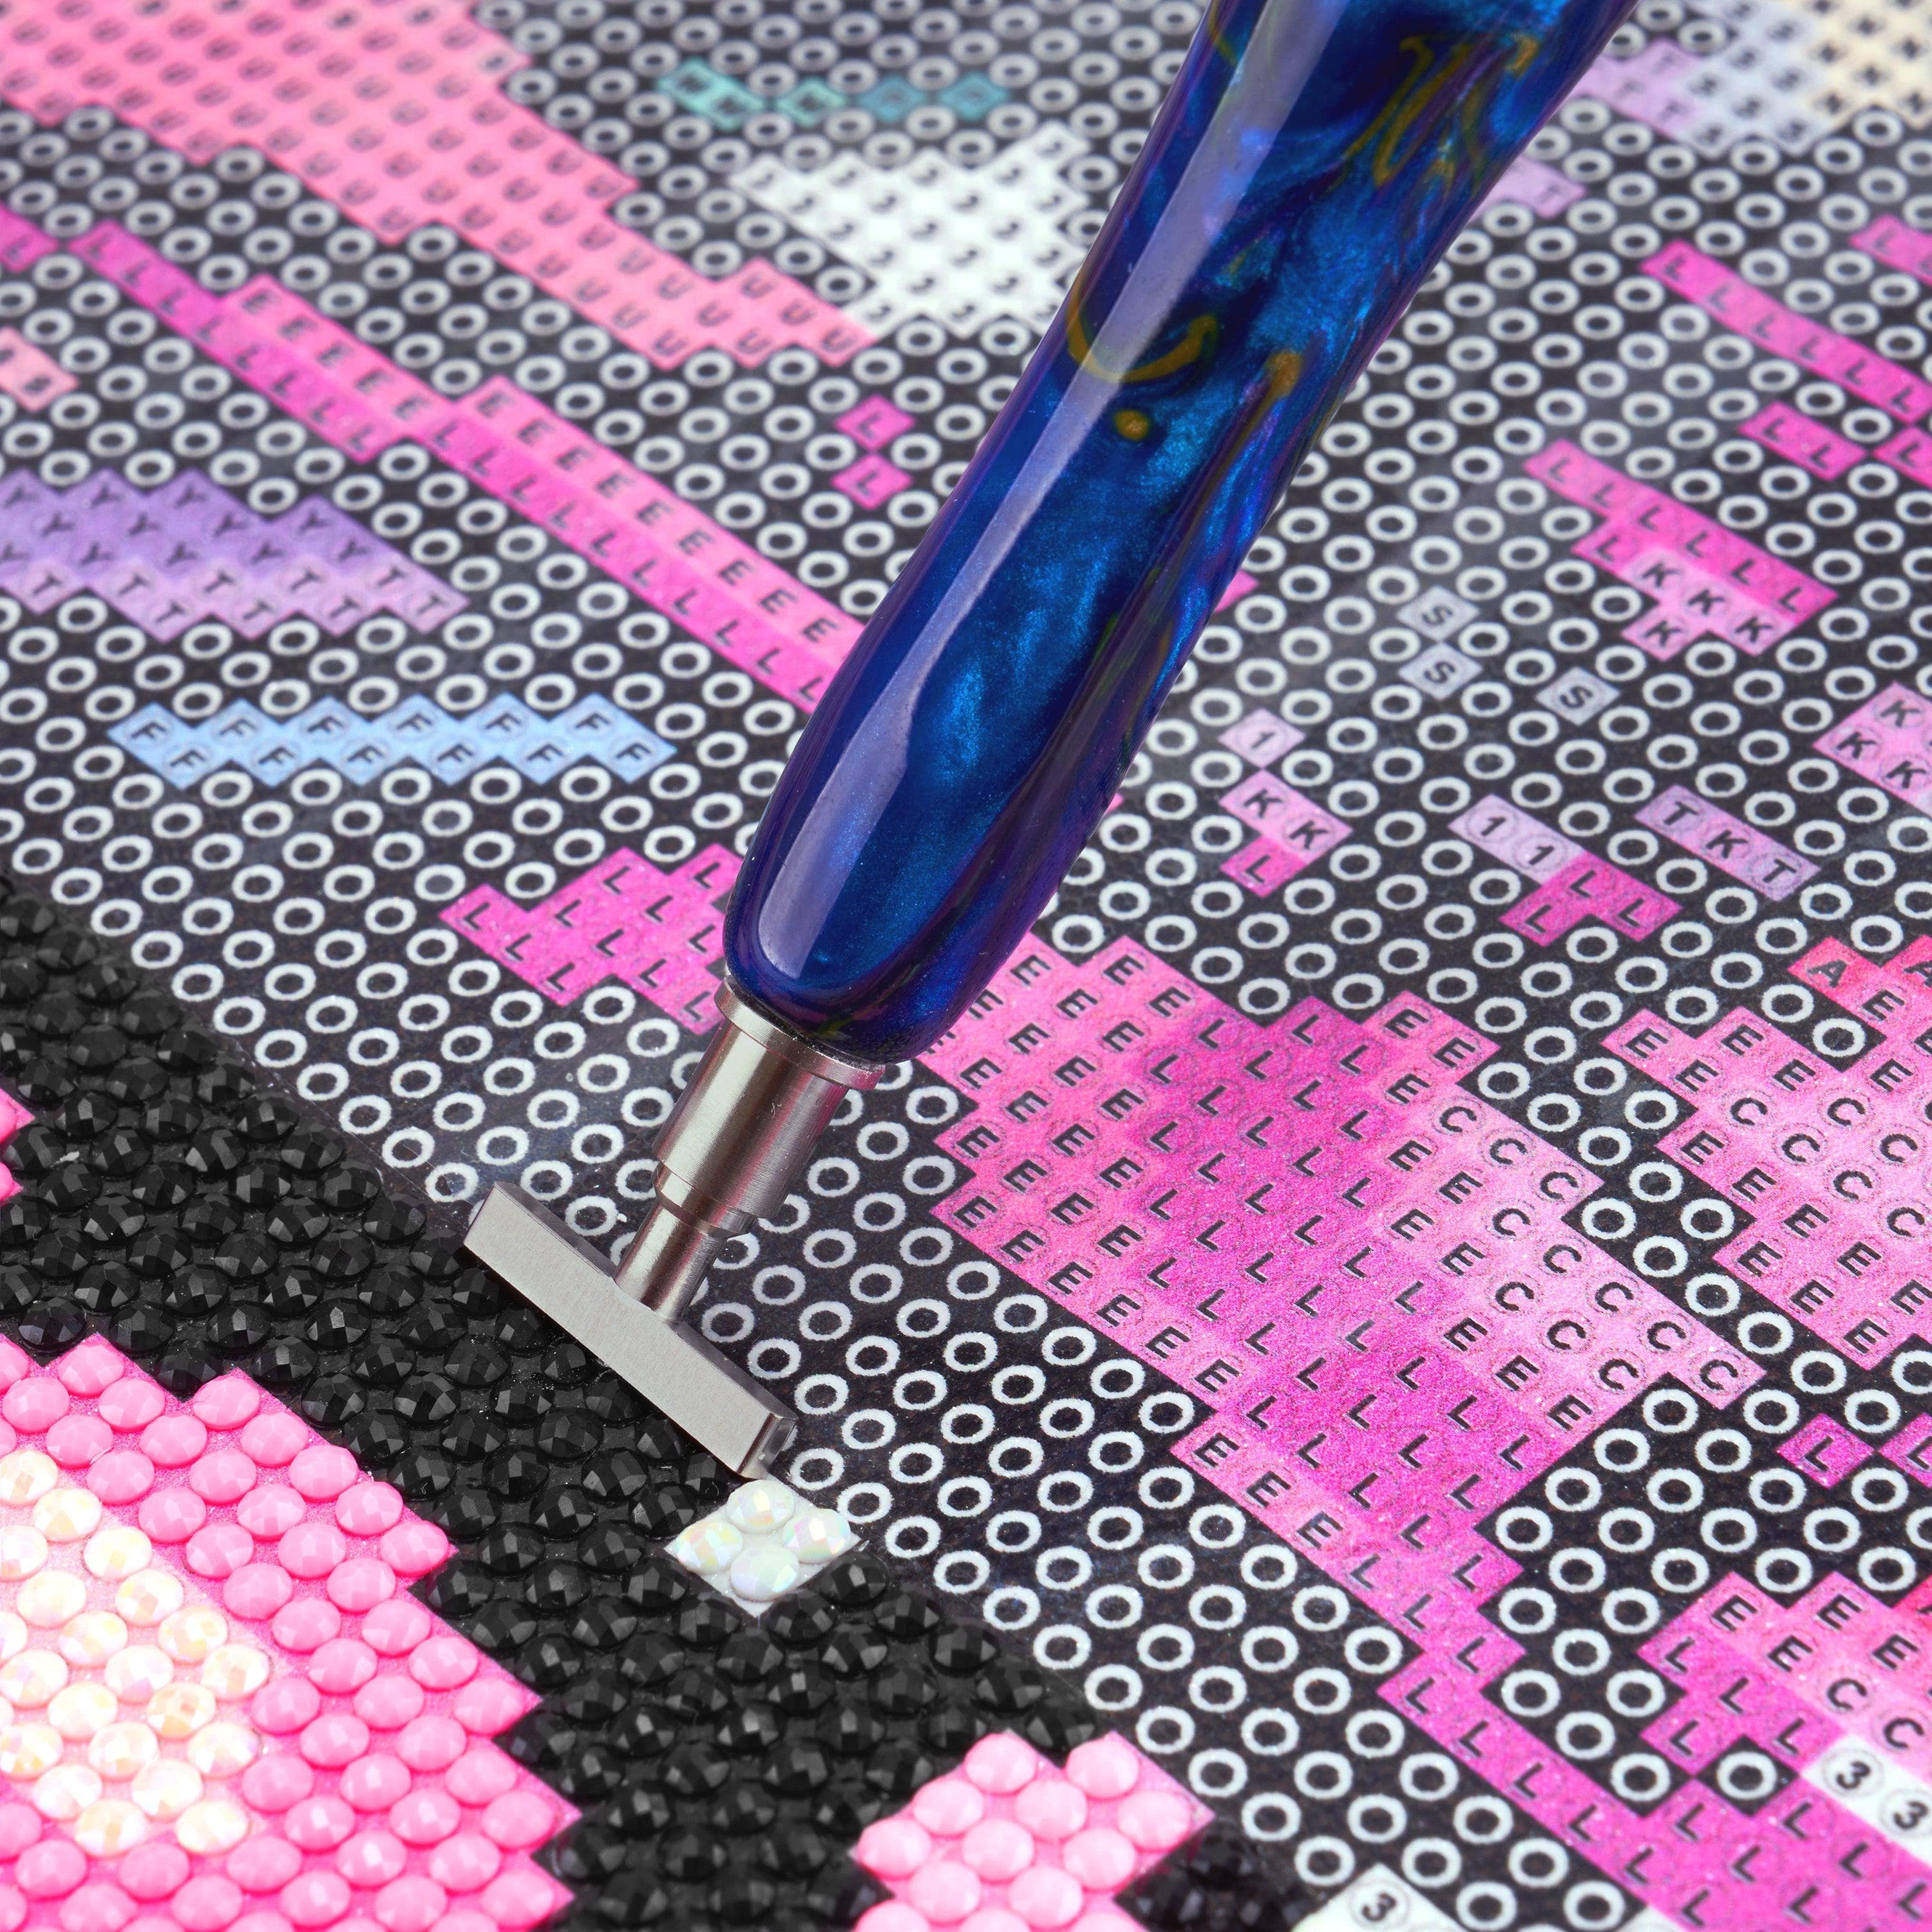 The Top 6 Tools Every Diamond Painter Must Have! - Diamond Painting Guide